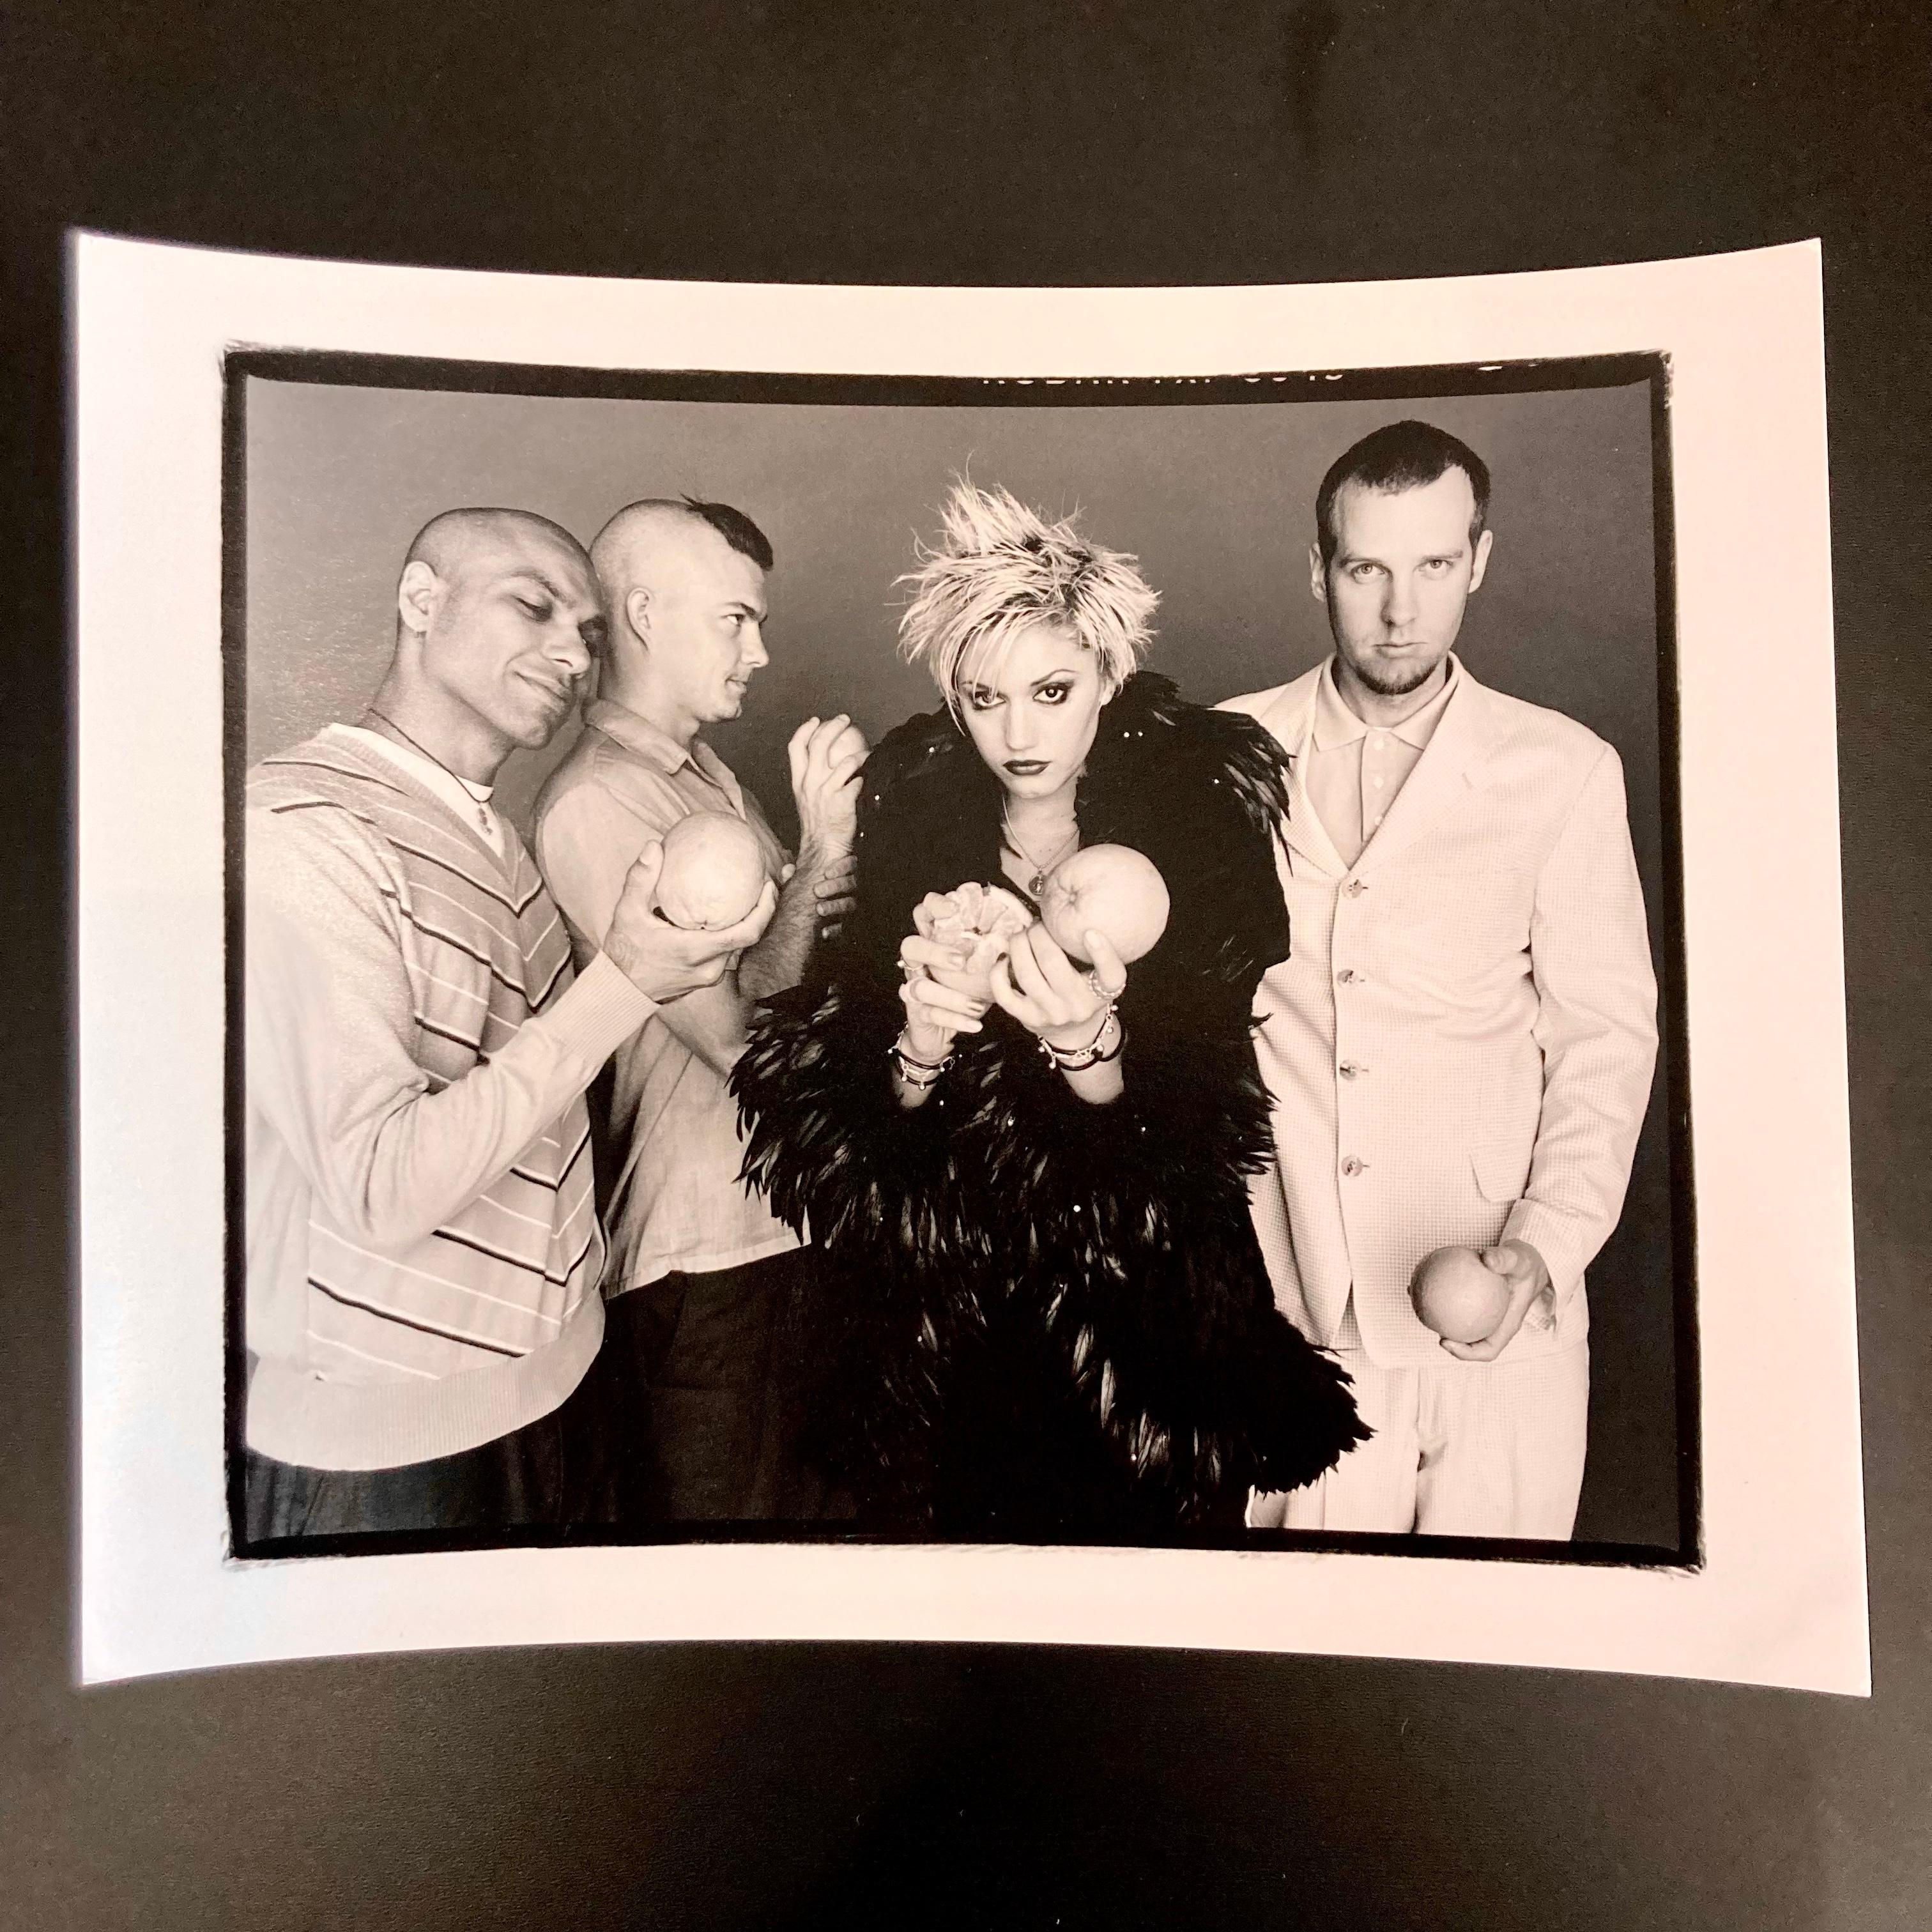 Gwen Stefani with Ska band No Doubt, 8”x10” Hand-printed darkroom print, made at the time of the shoot in 1997, and stored flat in a temperature-controlled environment.

The print is in perfect new condition with no flaws. Hand-signed on the back in